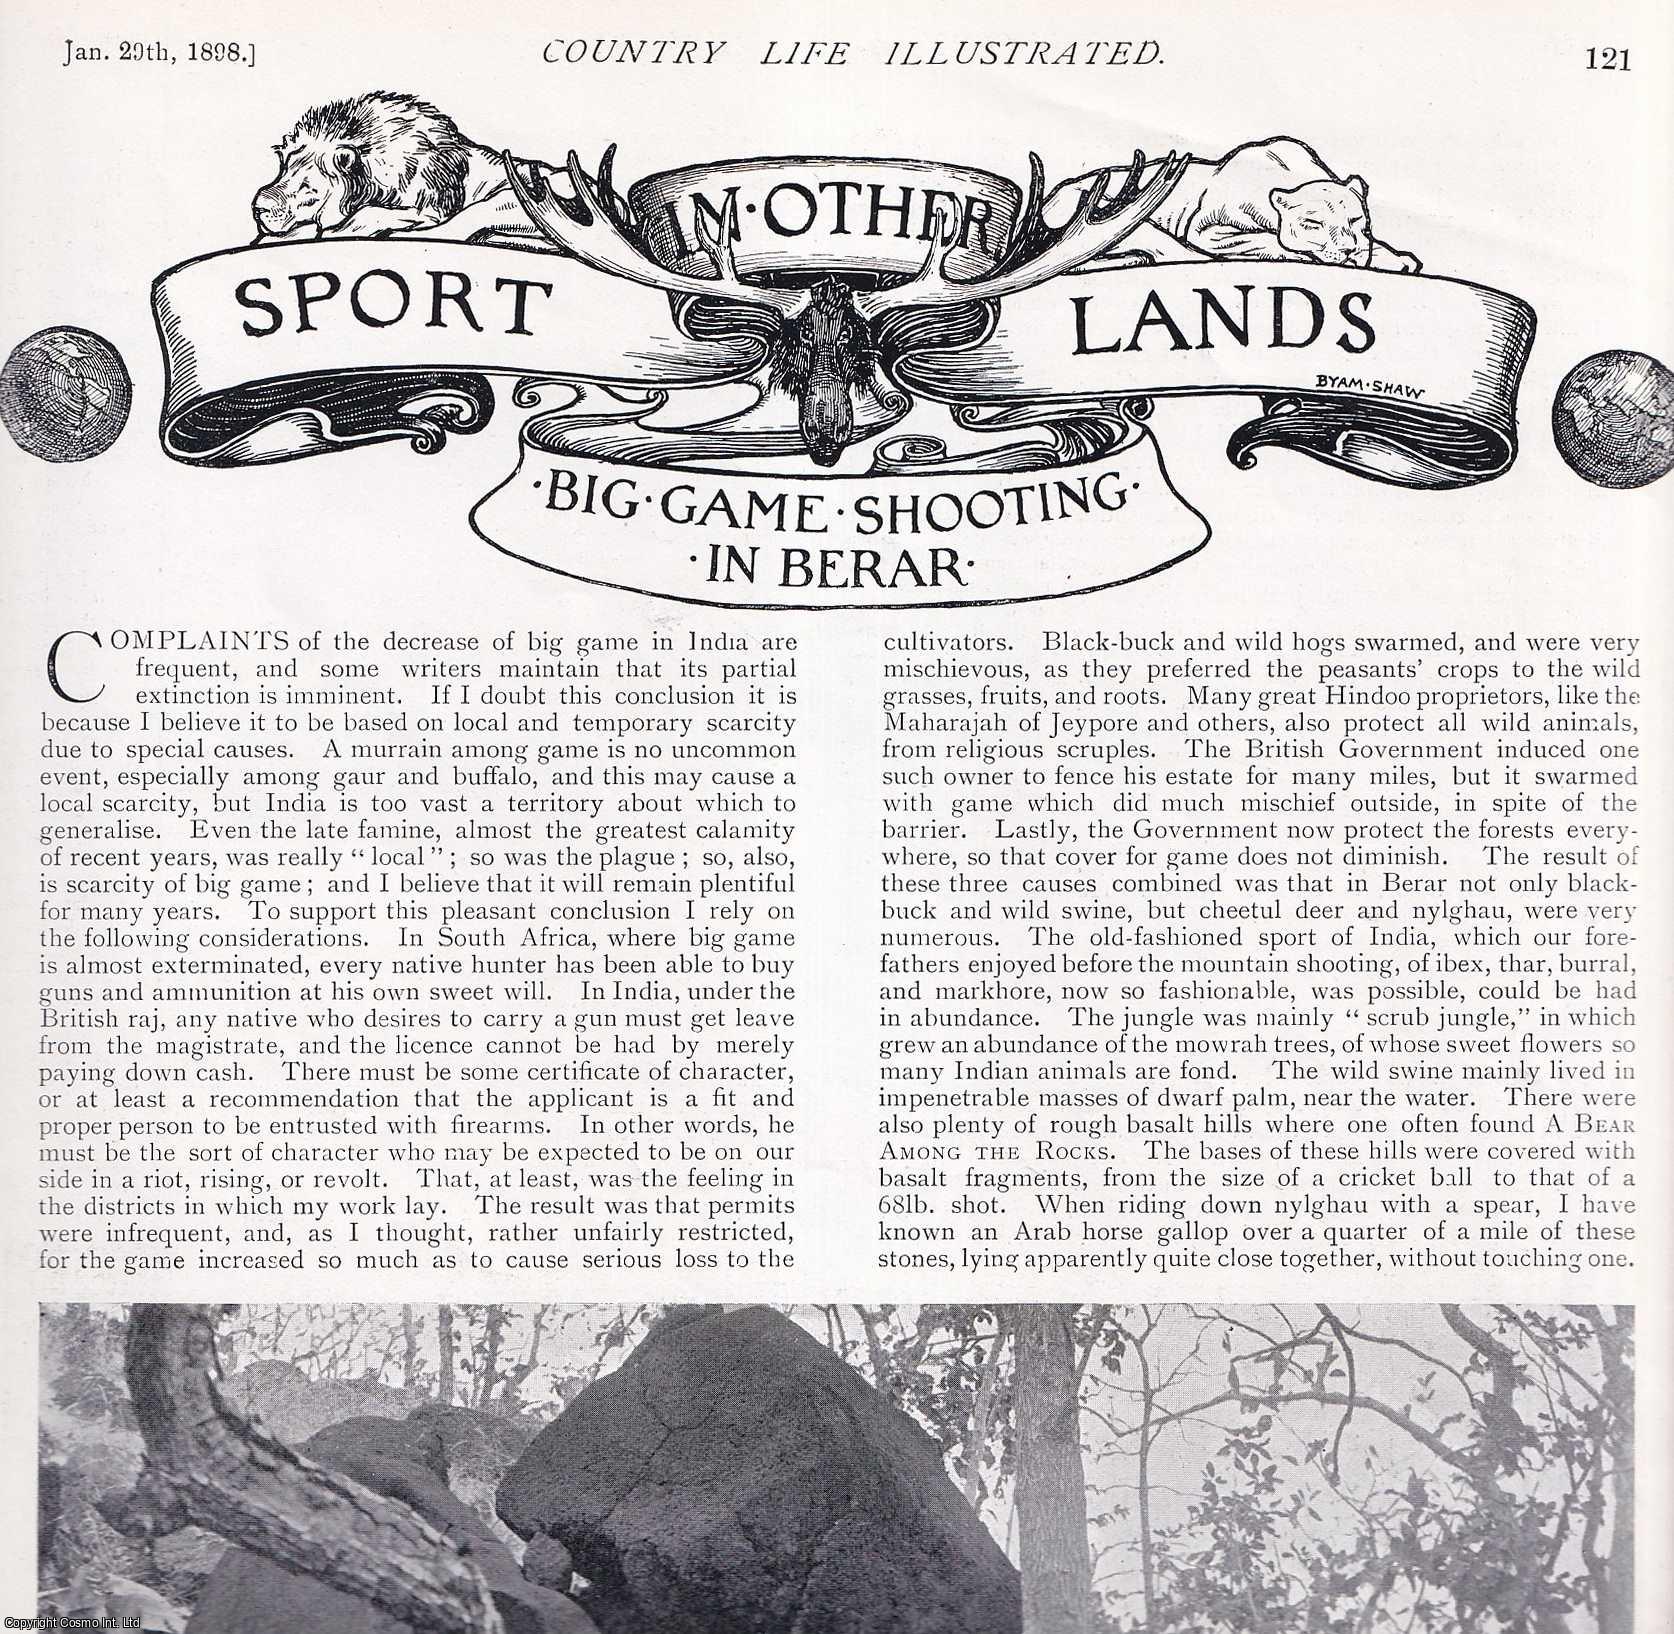 COUNTRY LIFE - Big Game Shooting in Berar, India. Several pictures and accompanying text, removed from an original issue of Country Life Magazine, 1898.